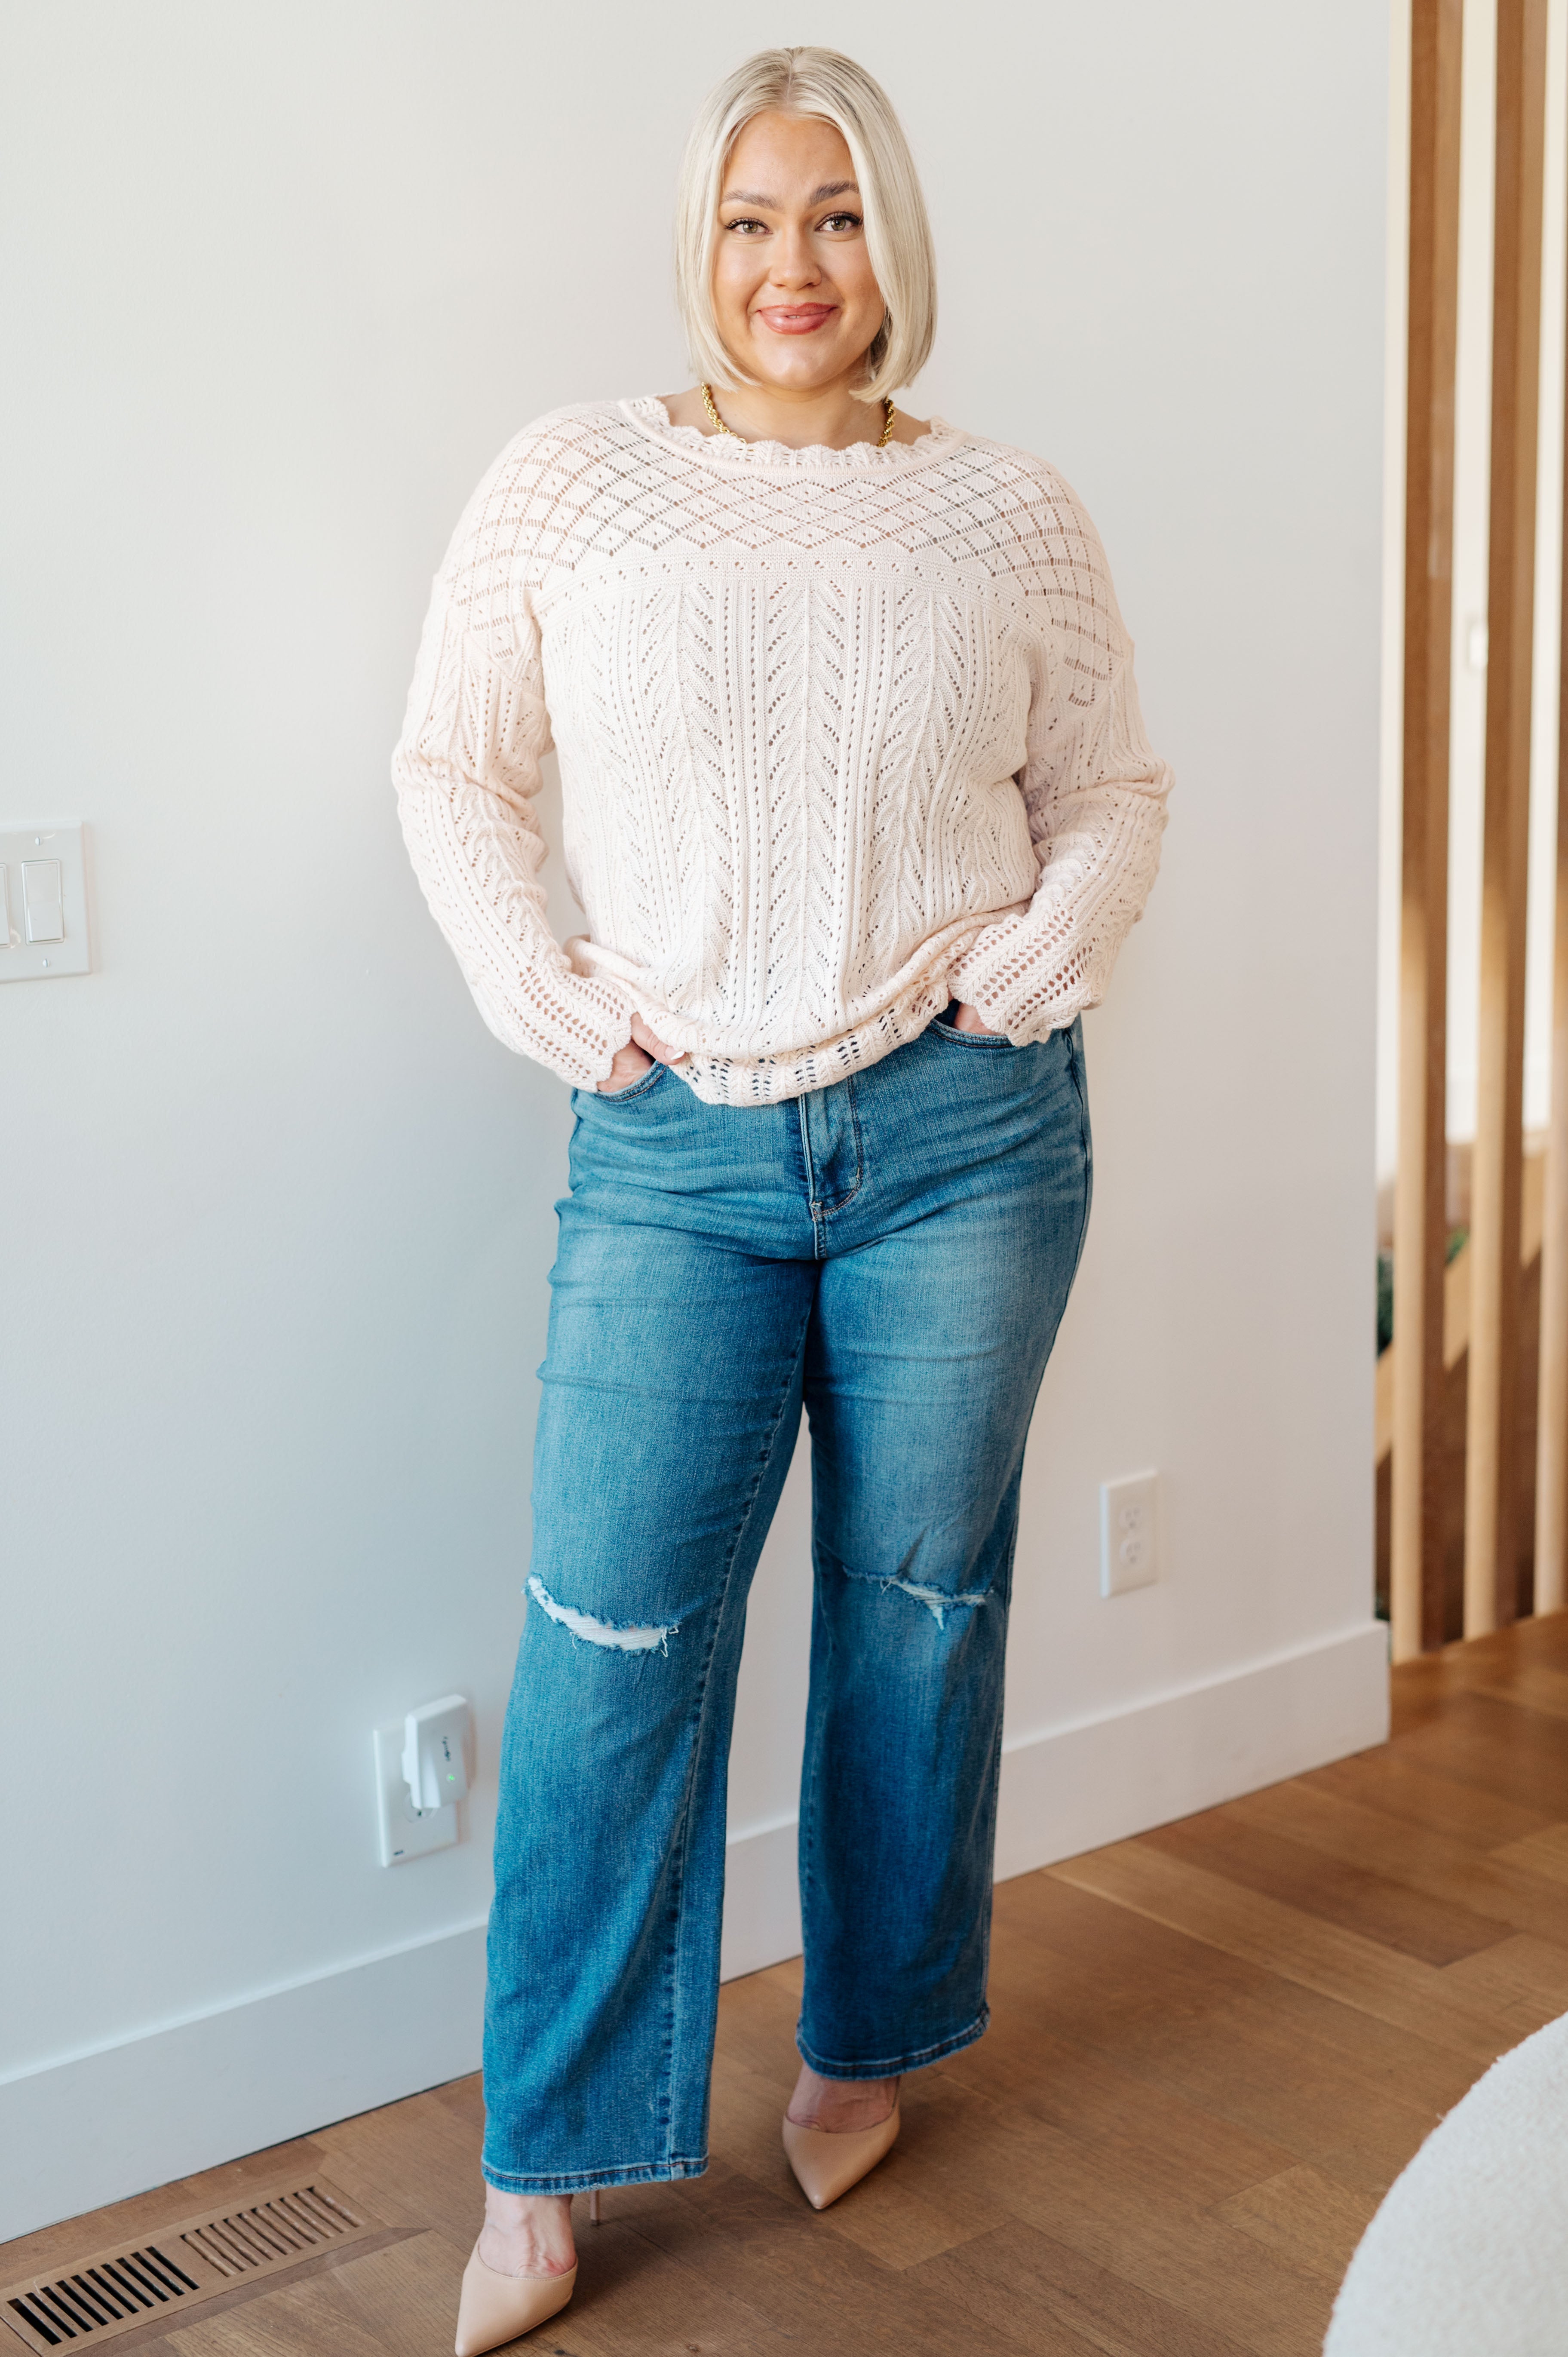 Never Let Down Lightweight Knit Sweater - Lola Cerina Boutique